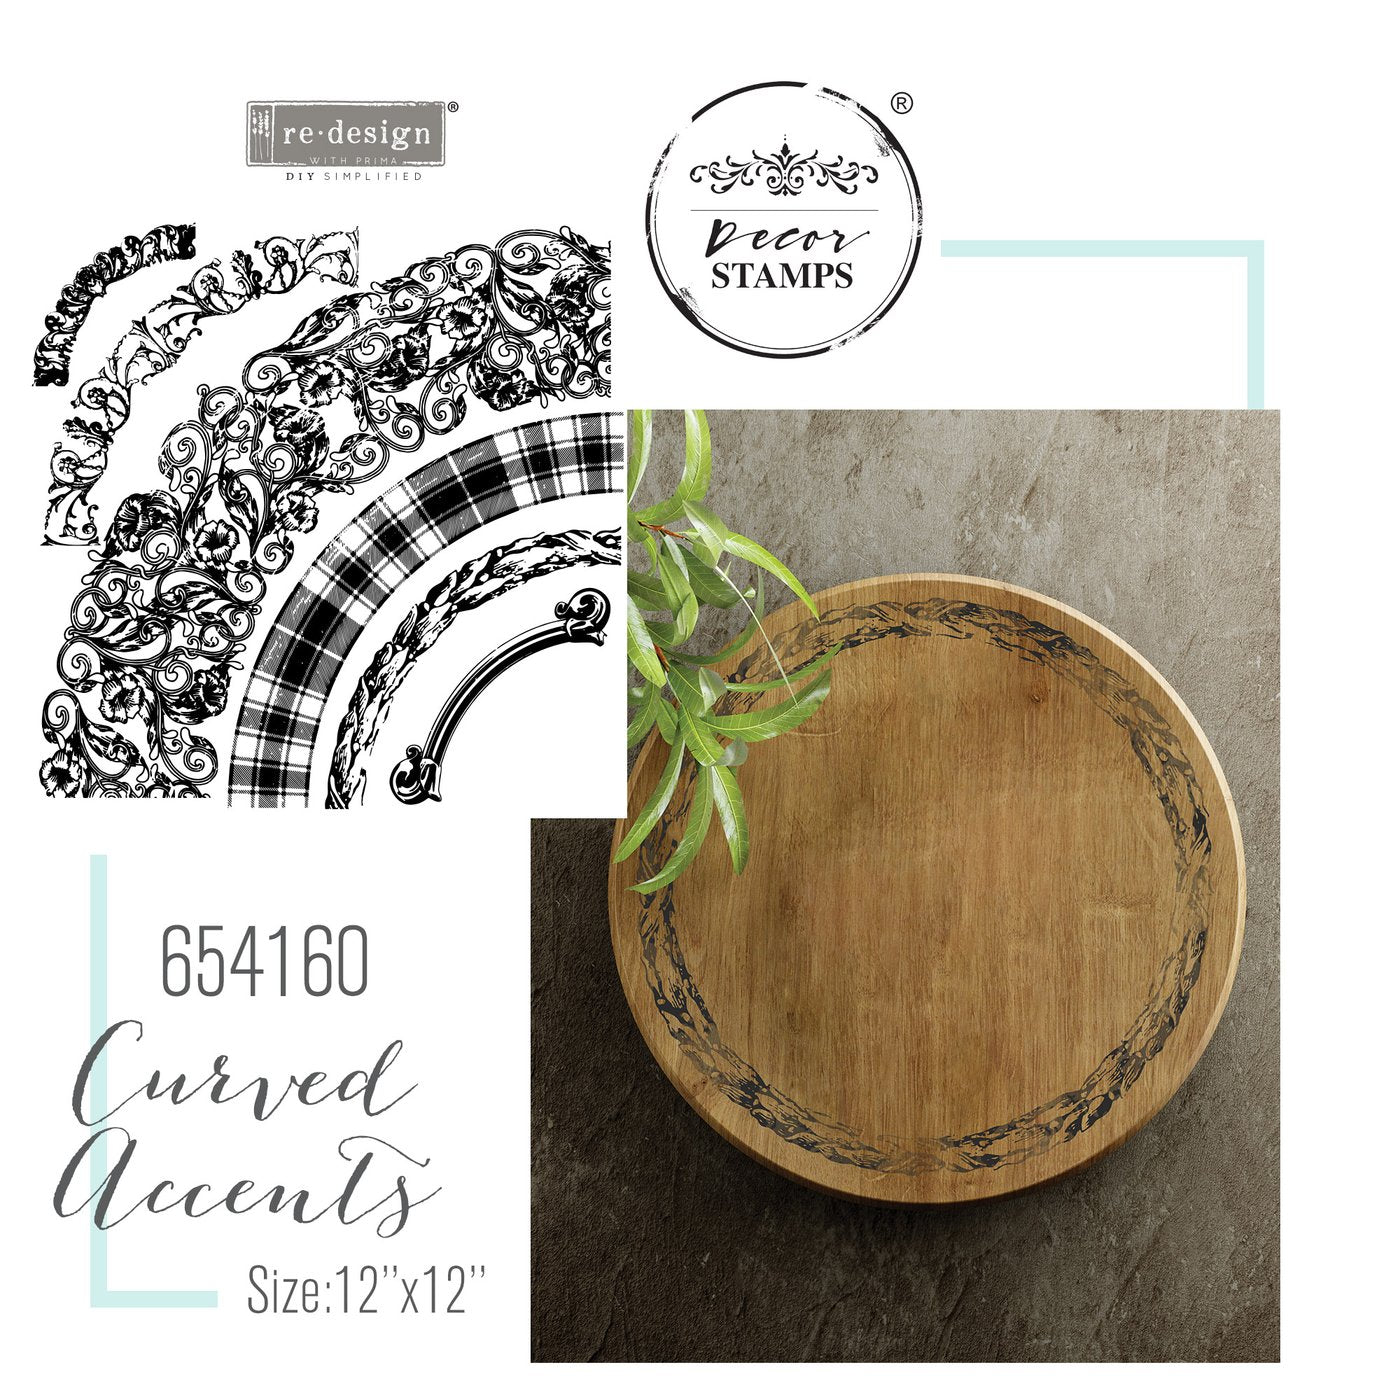 CURVED ACCENTS - REDESIGN DECOR STAMP - REDESIGN WITH PRIMA